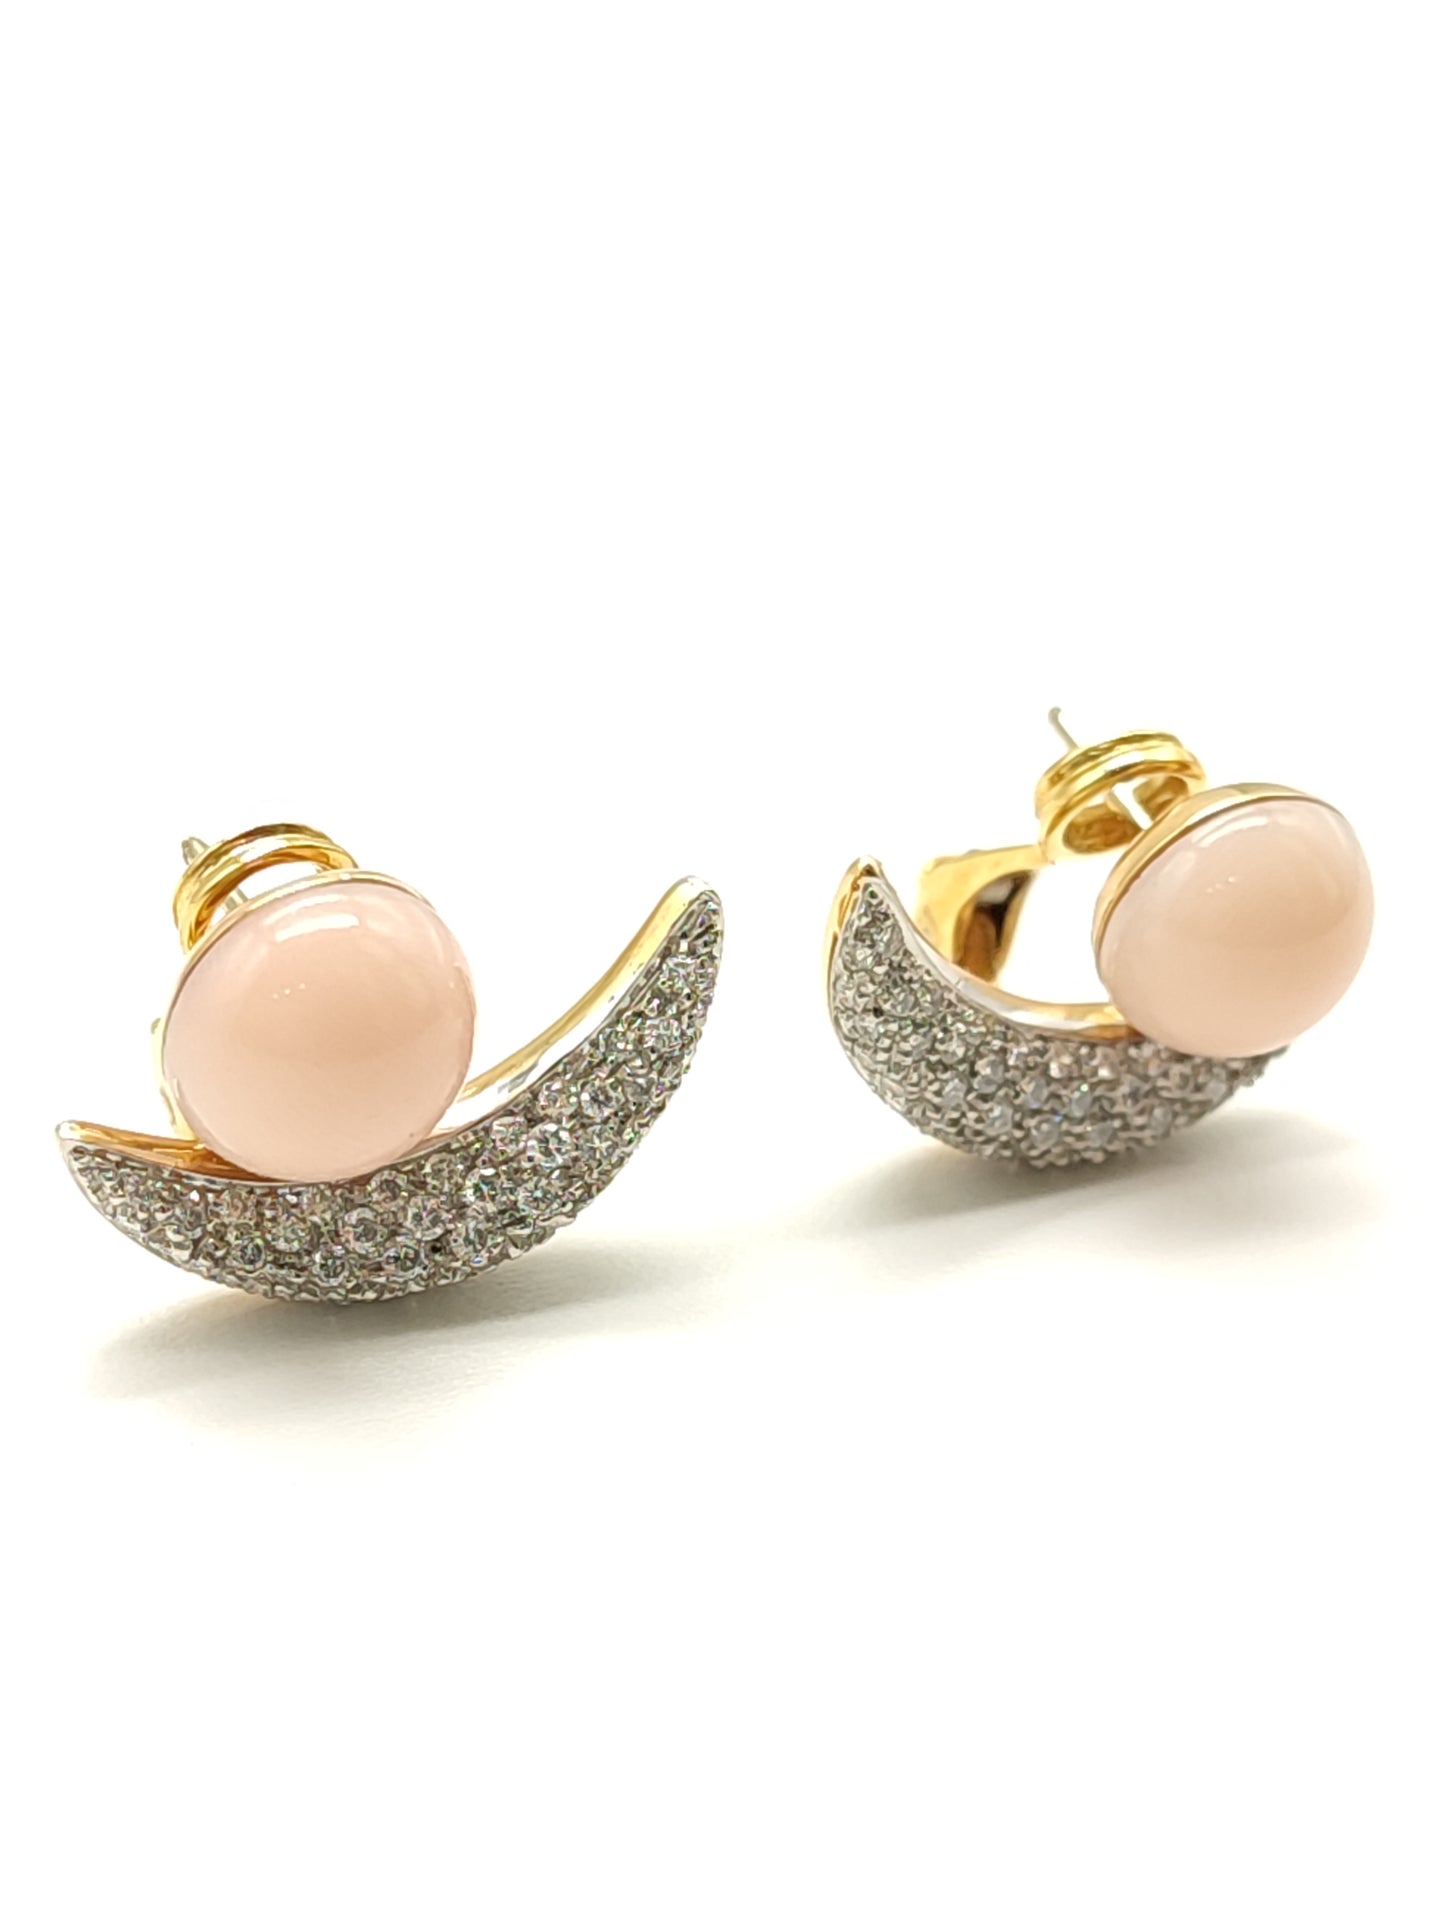 Gold and platinum earrings with diamonds